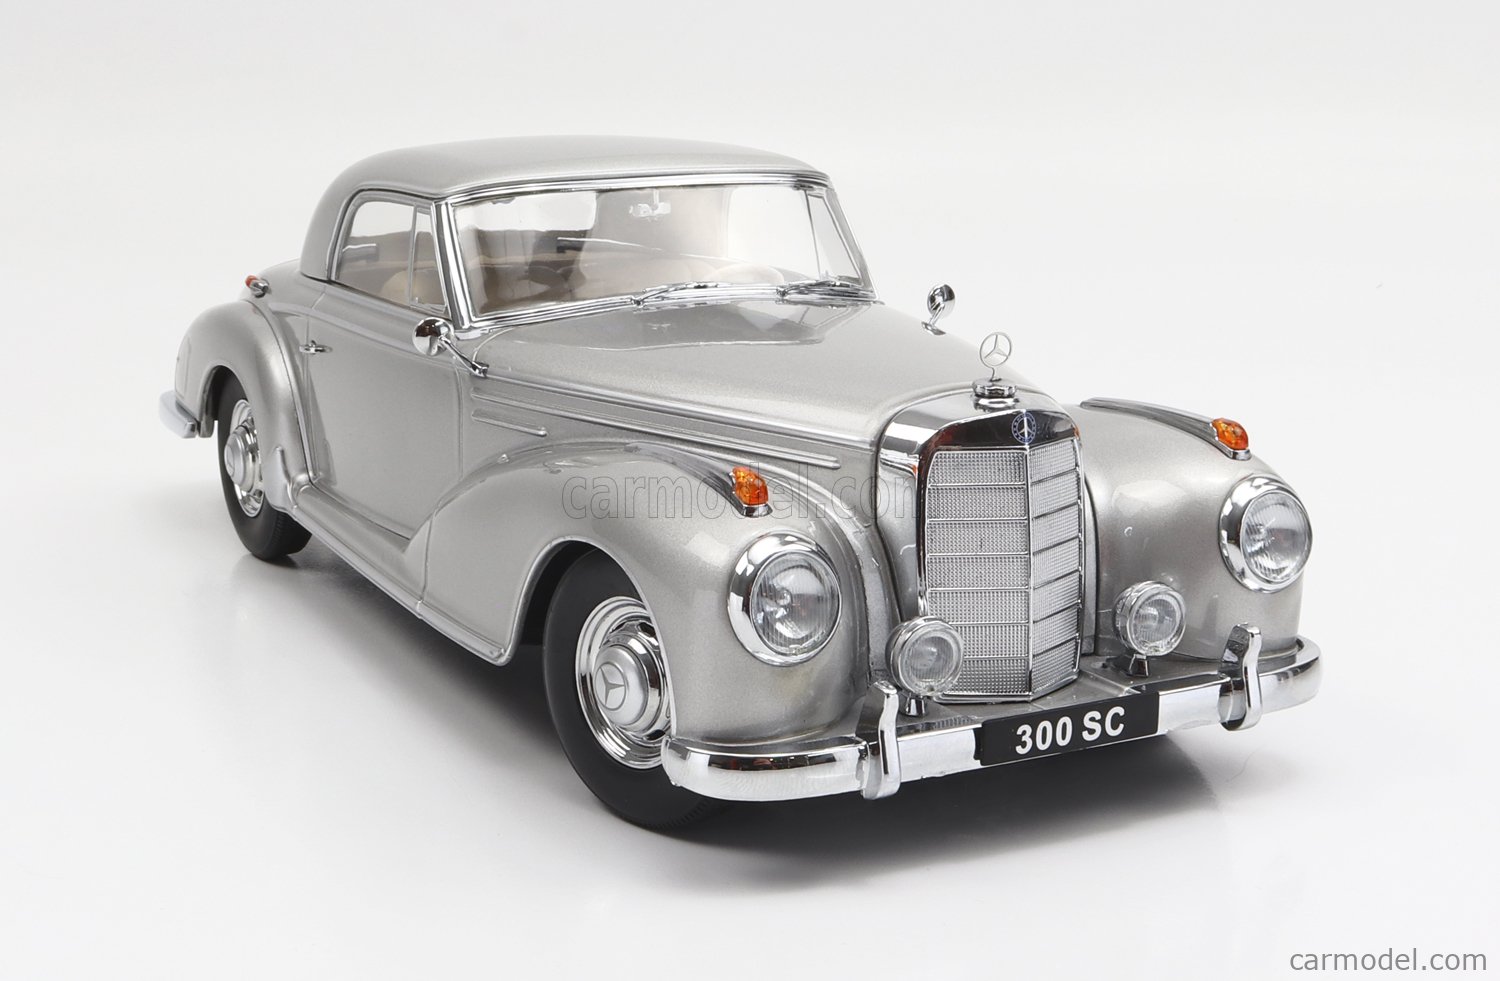 KK-SCALE KKDC180833 Scale 1/18 | MERCEDES BENZ 300S COUPE (W188